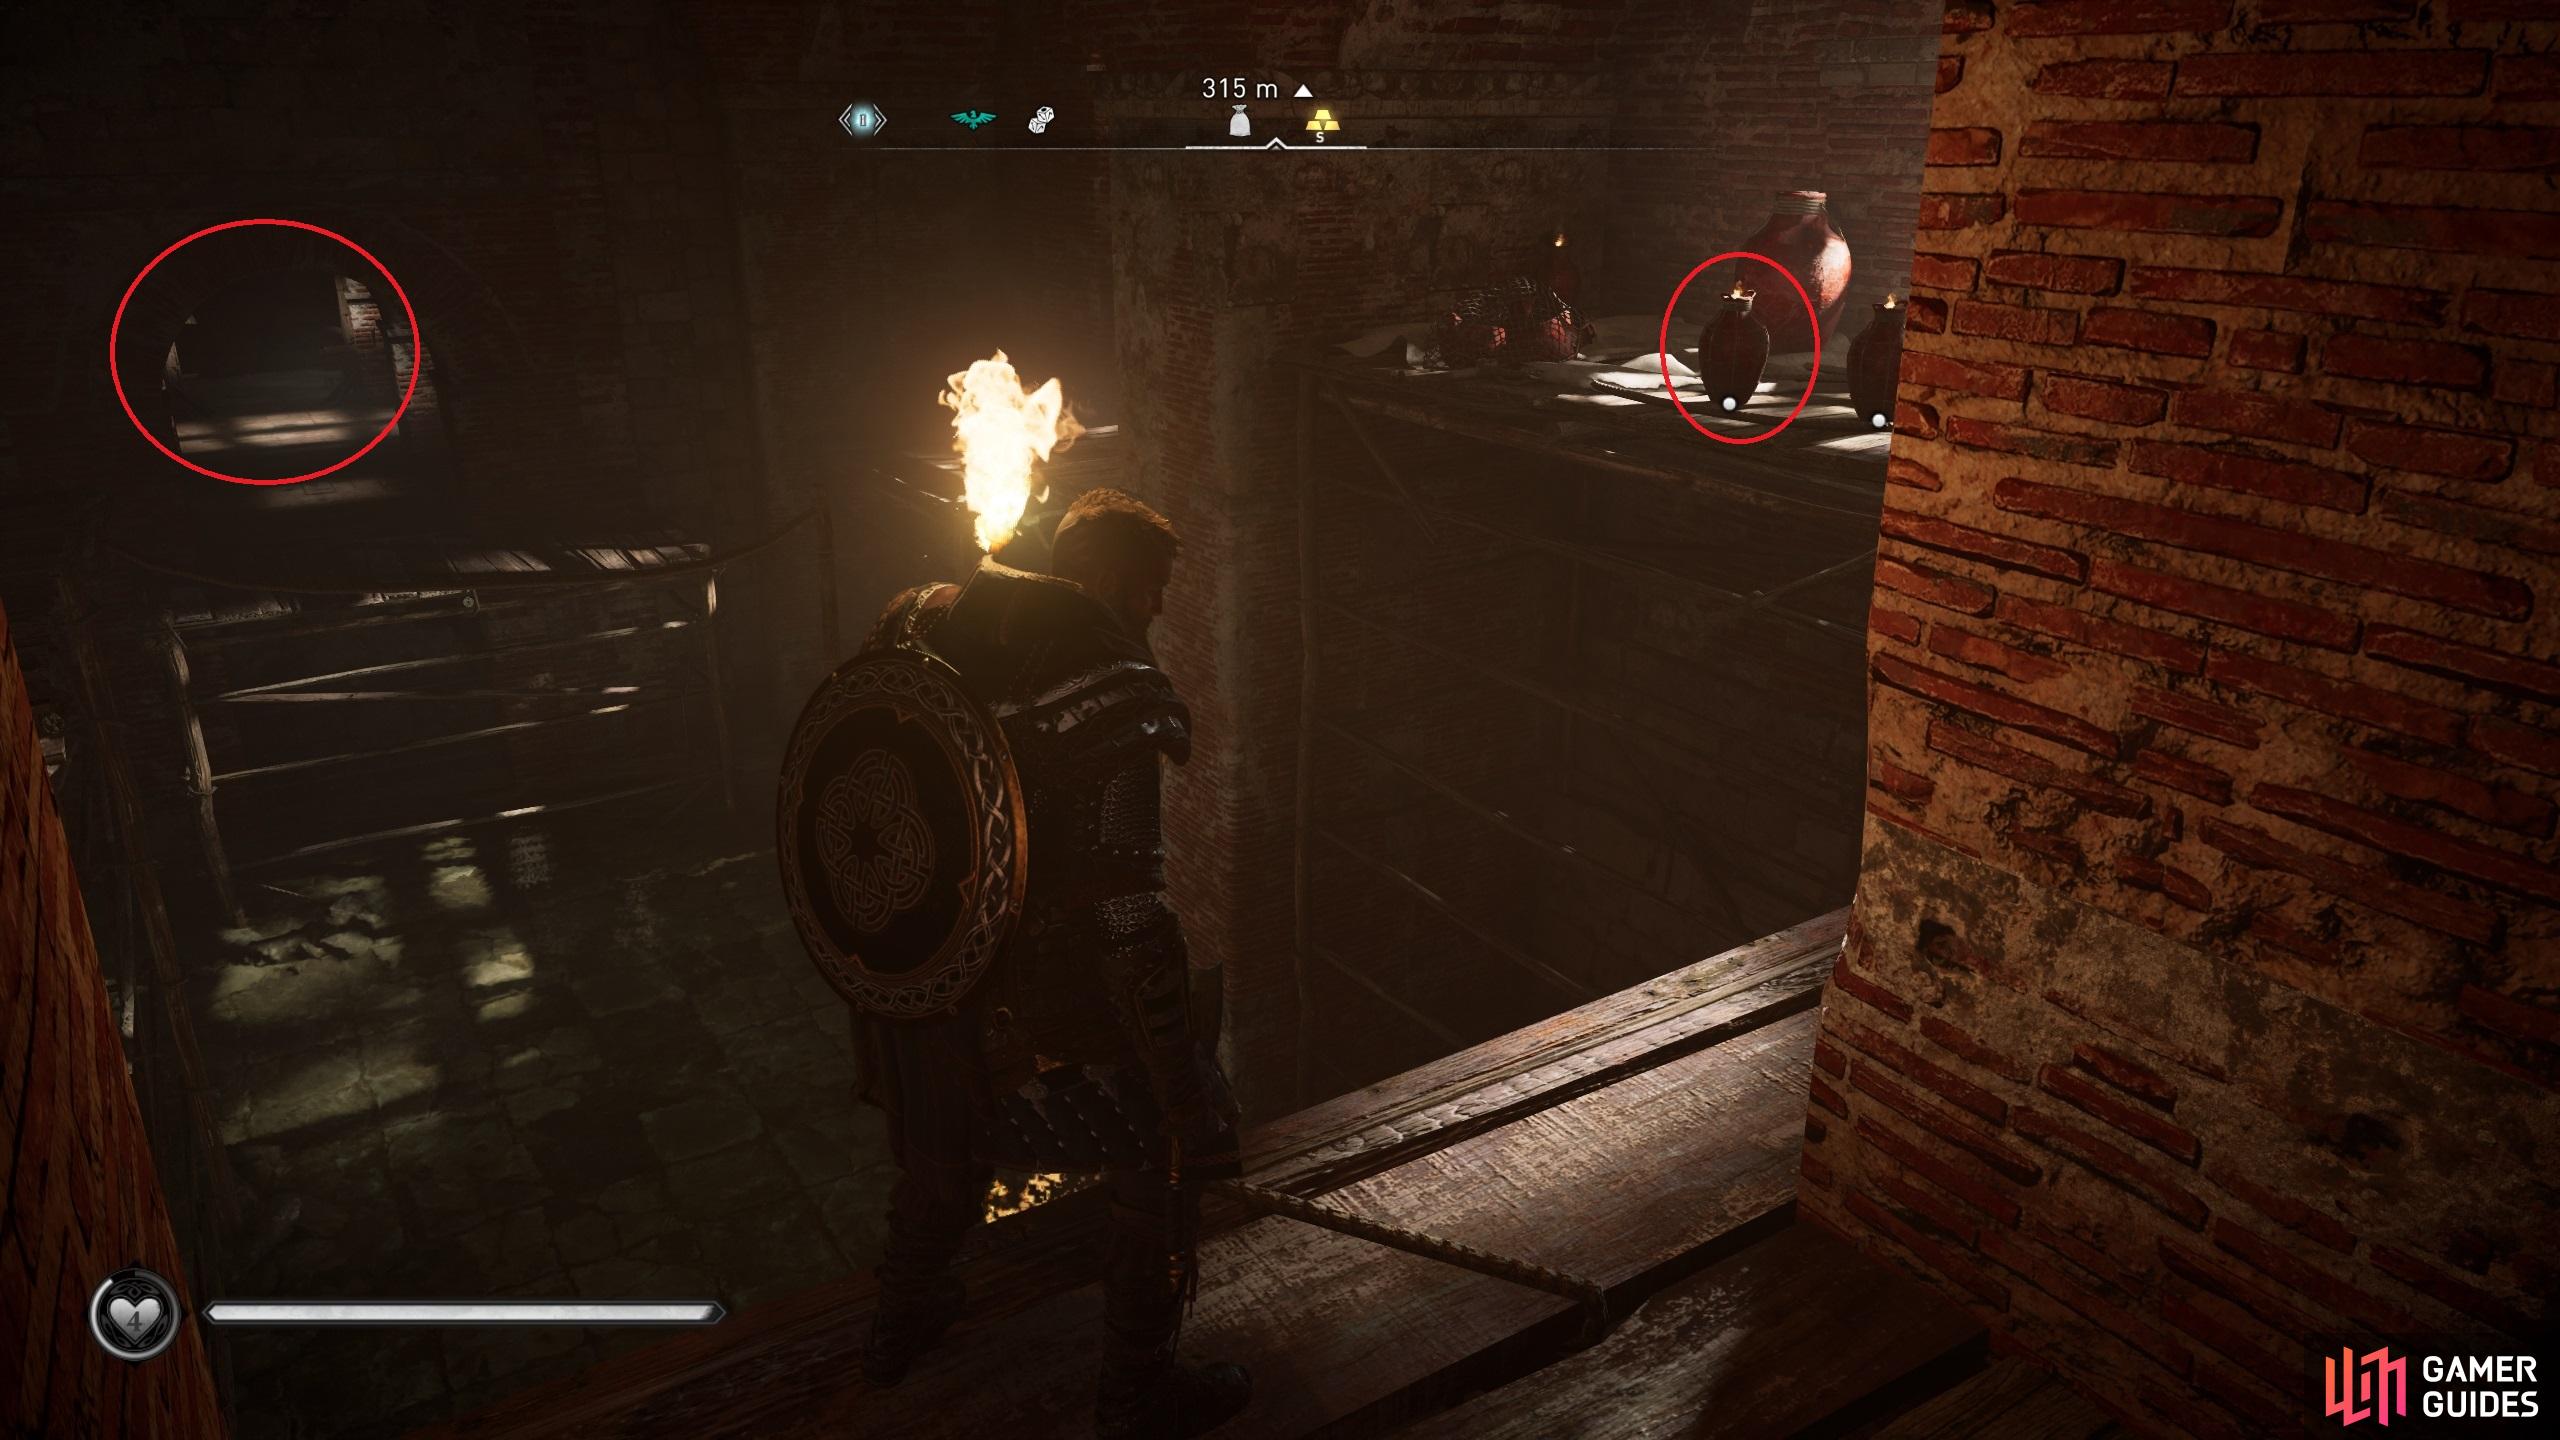 You'll find fire pots on the western side of the open room, which you can use to destroy the blockade on the other side.